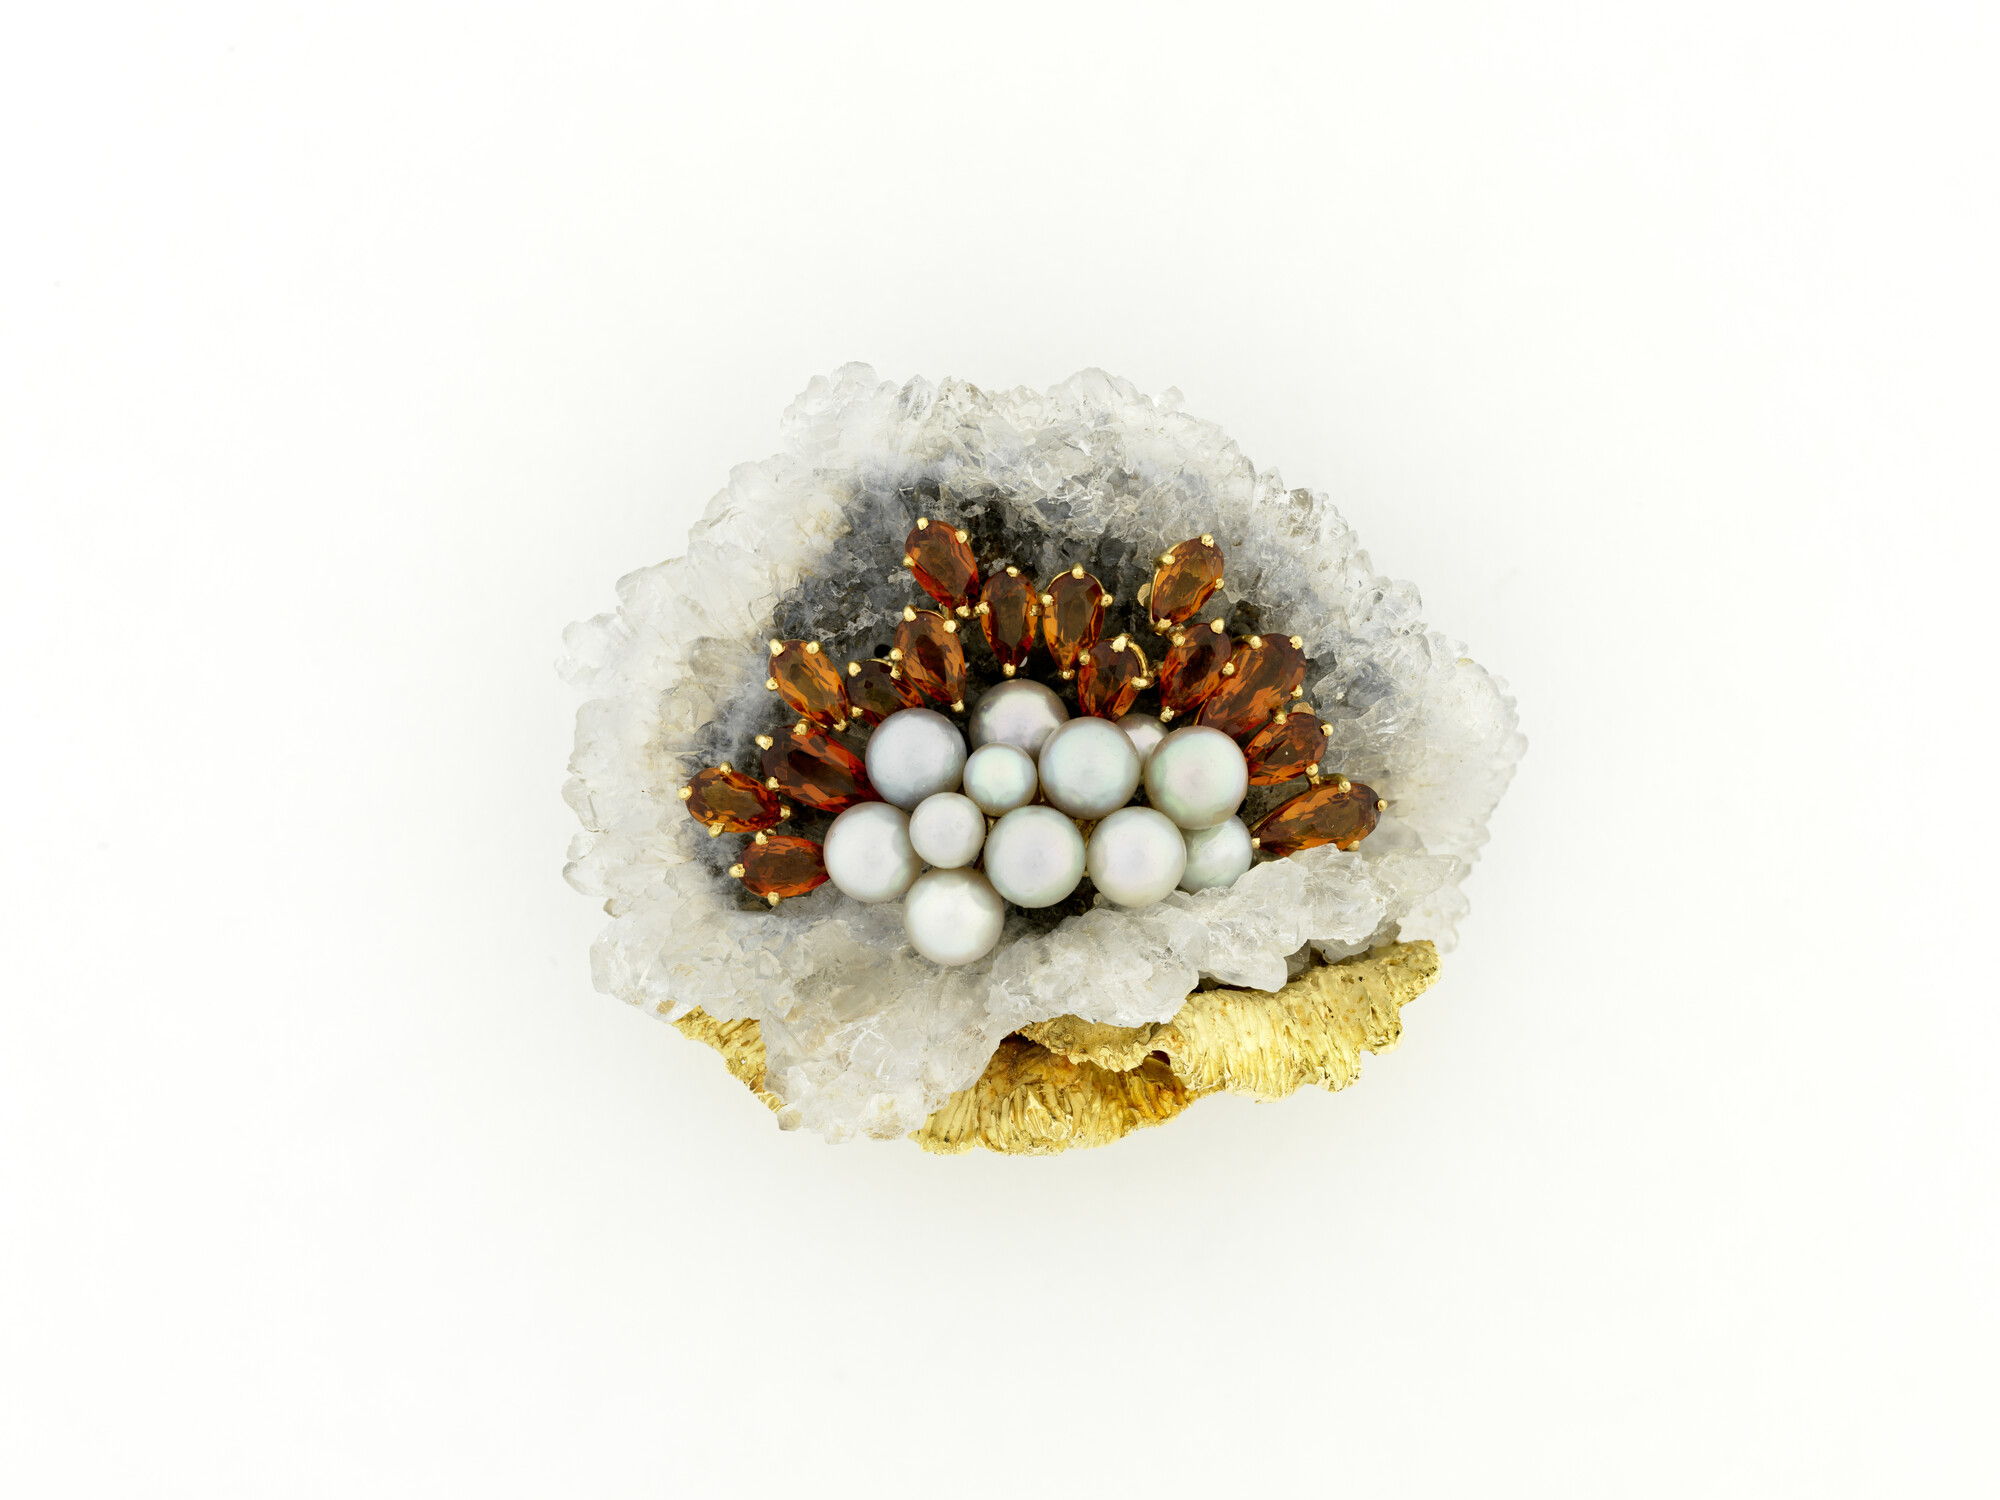 Broche, Maison Wolfers, 1970s - City of Antwerp collection, DIVA, inv.nr. S2021/27 - Photograph: Dominique Provost